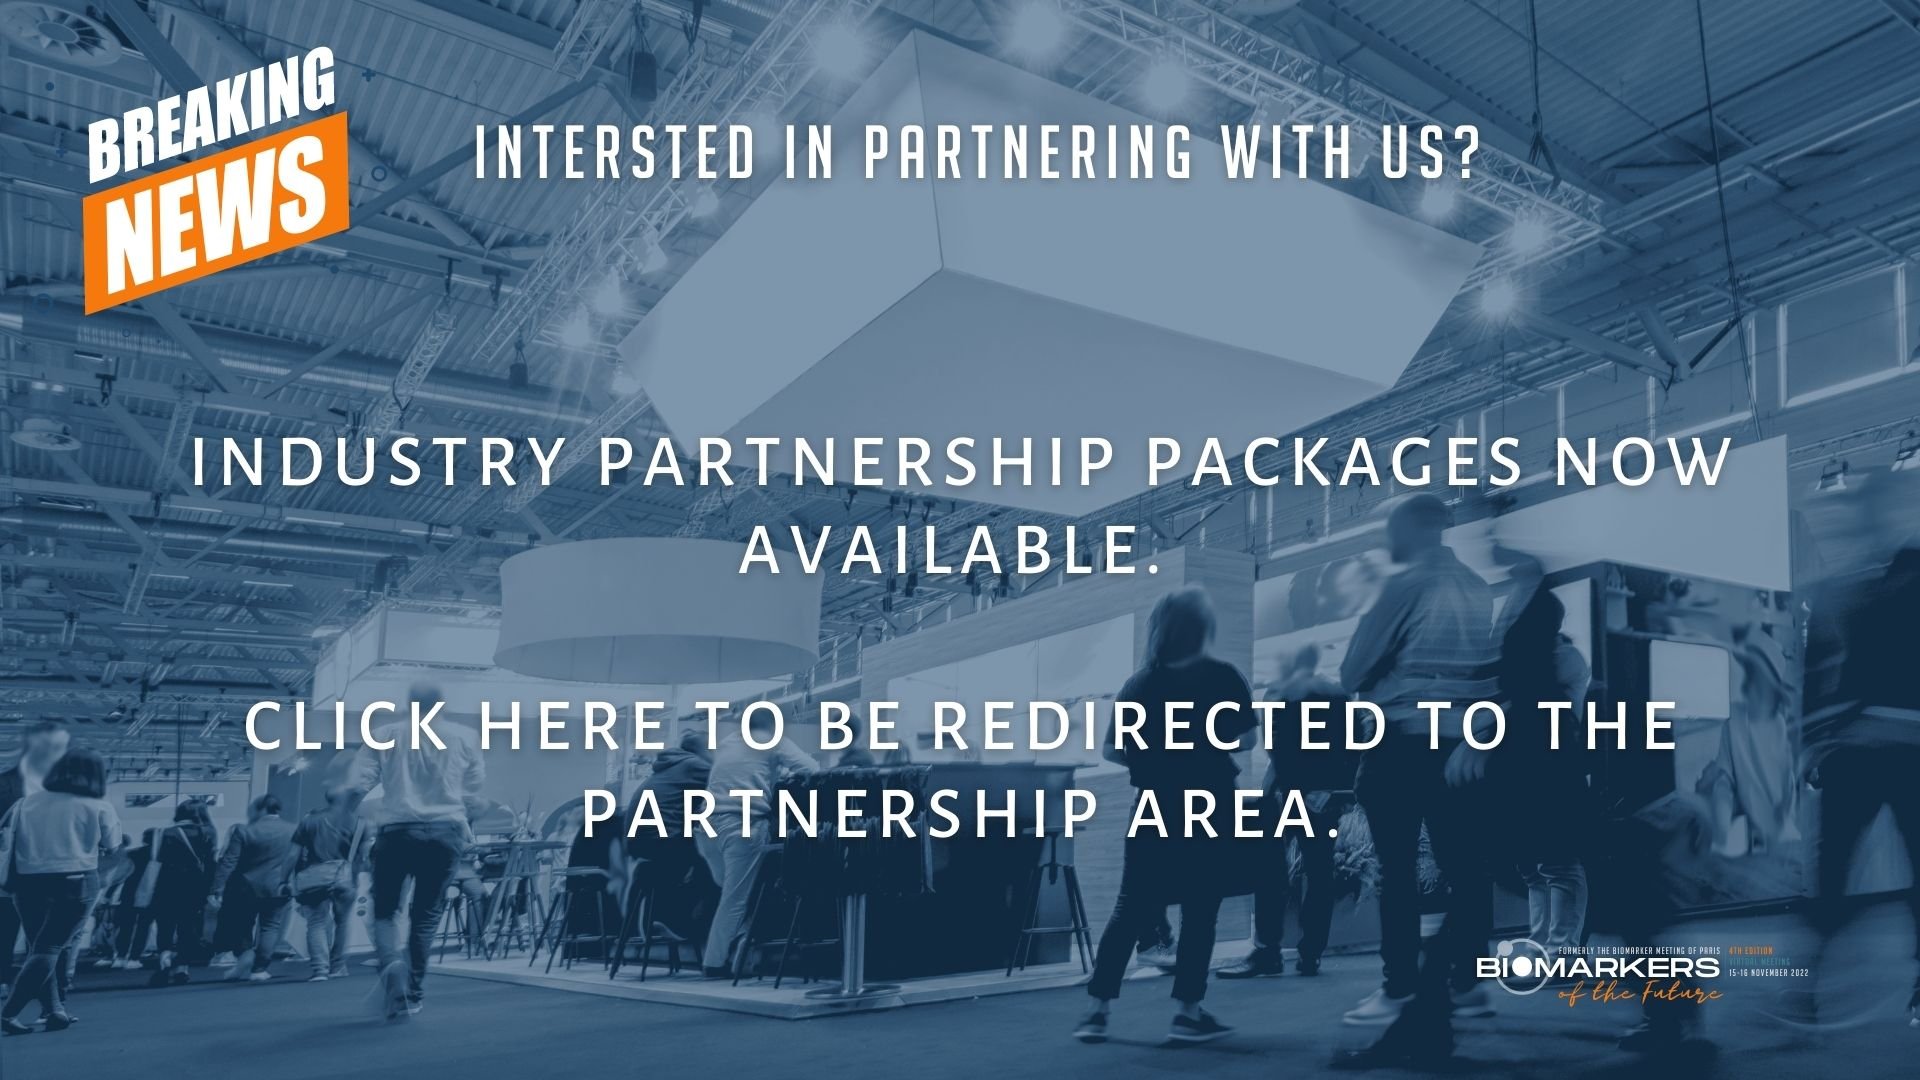 Partnership packages now available